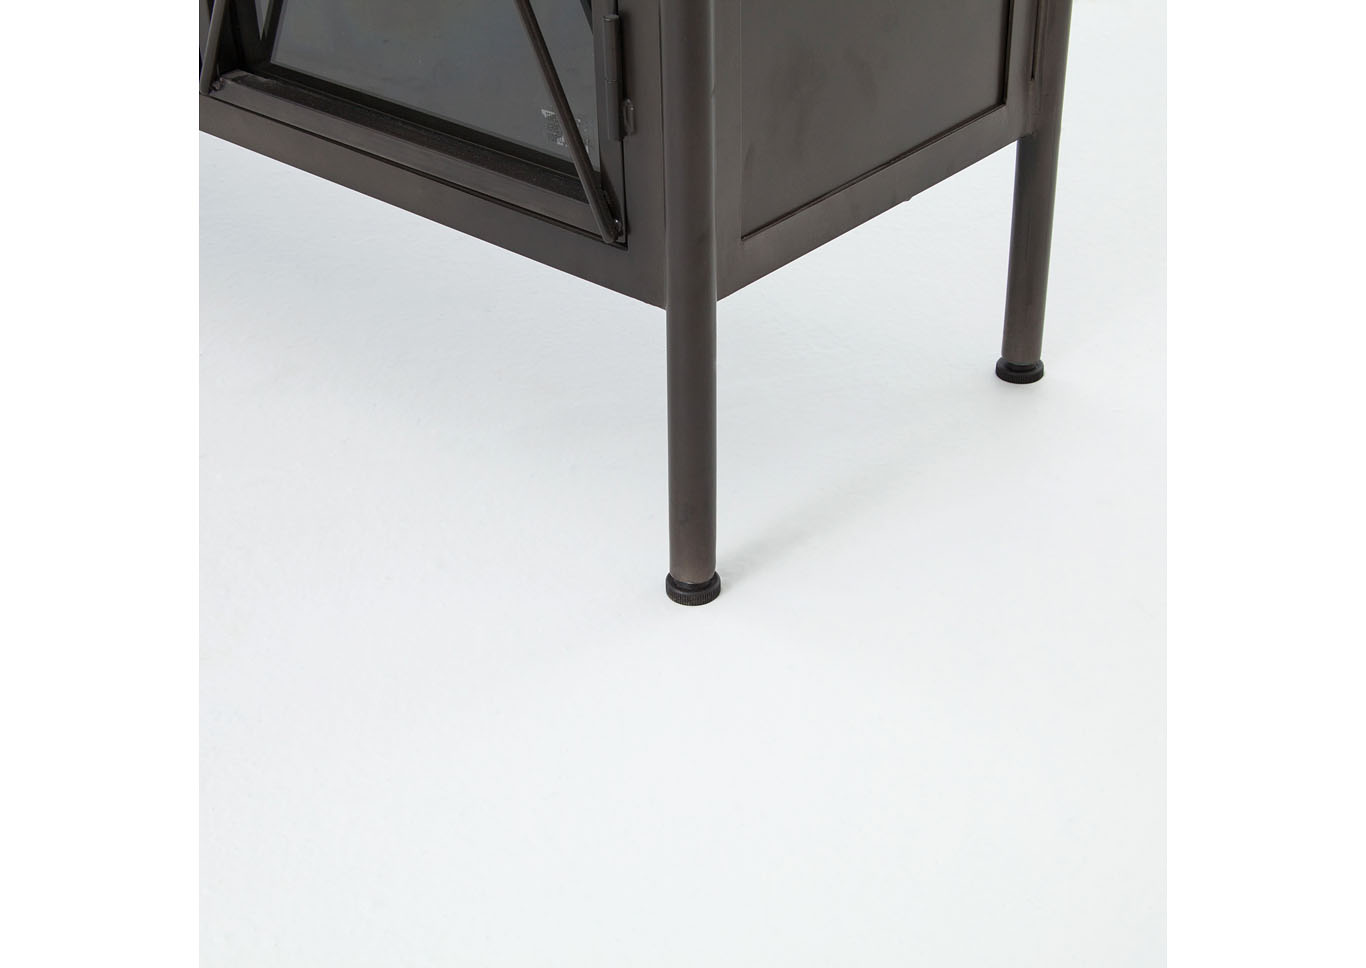 Waxed Black (pc) + Tempered Glass Irondale Allegra Sideboard-Waxed Black,Four Hands Furnishing Style